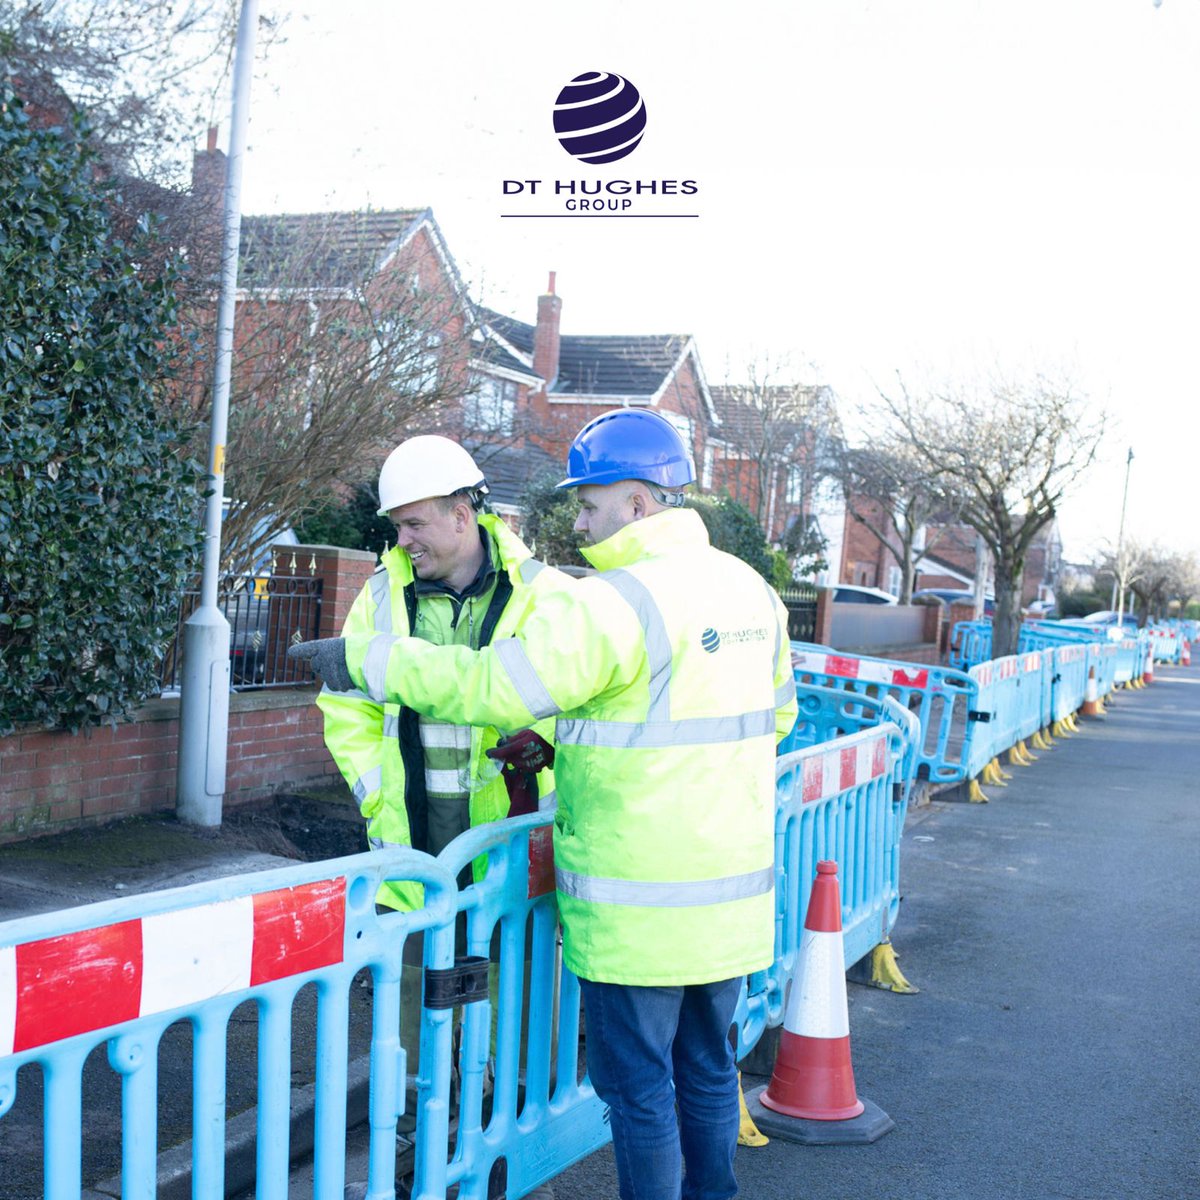 At DT Hughes Group we deliver what we promise. 

For over 35 years we have built a reputation based on long term relationships, mutual understanding, excellence and client satisfaction.

Get in touch today to learn more.

#liverpoolbusiness #construction #serviceprovider